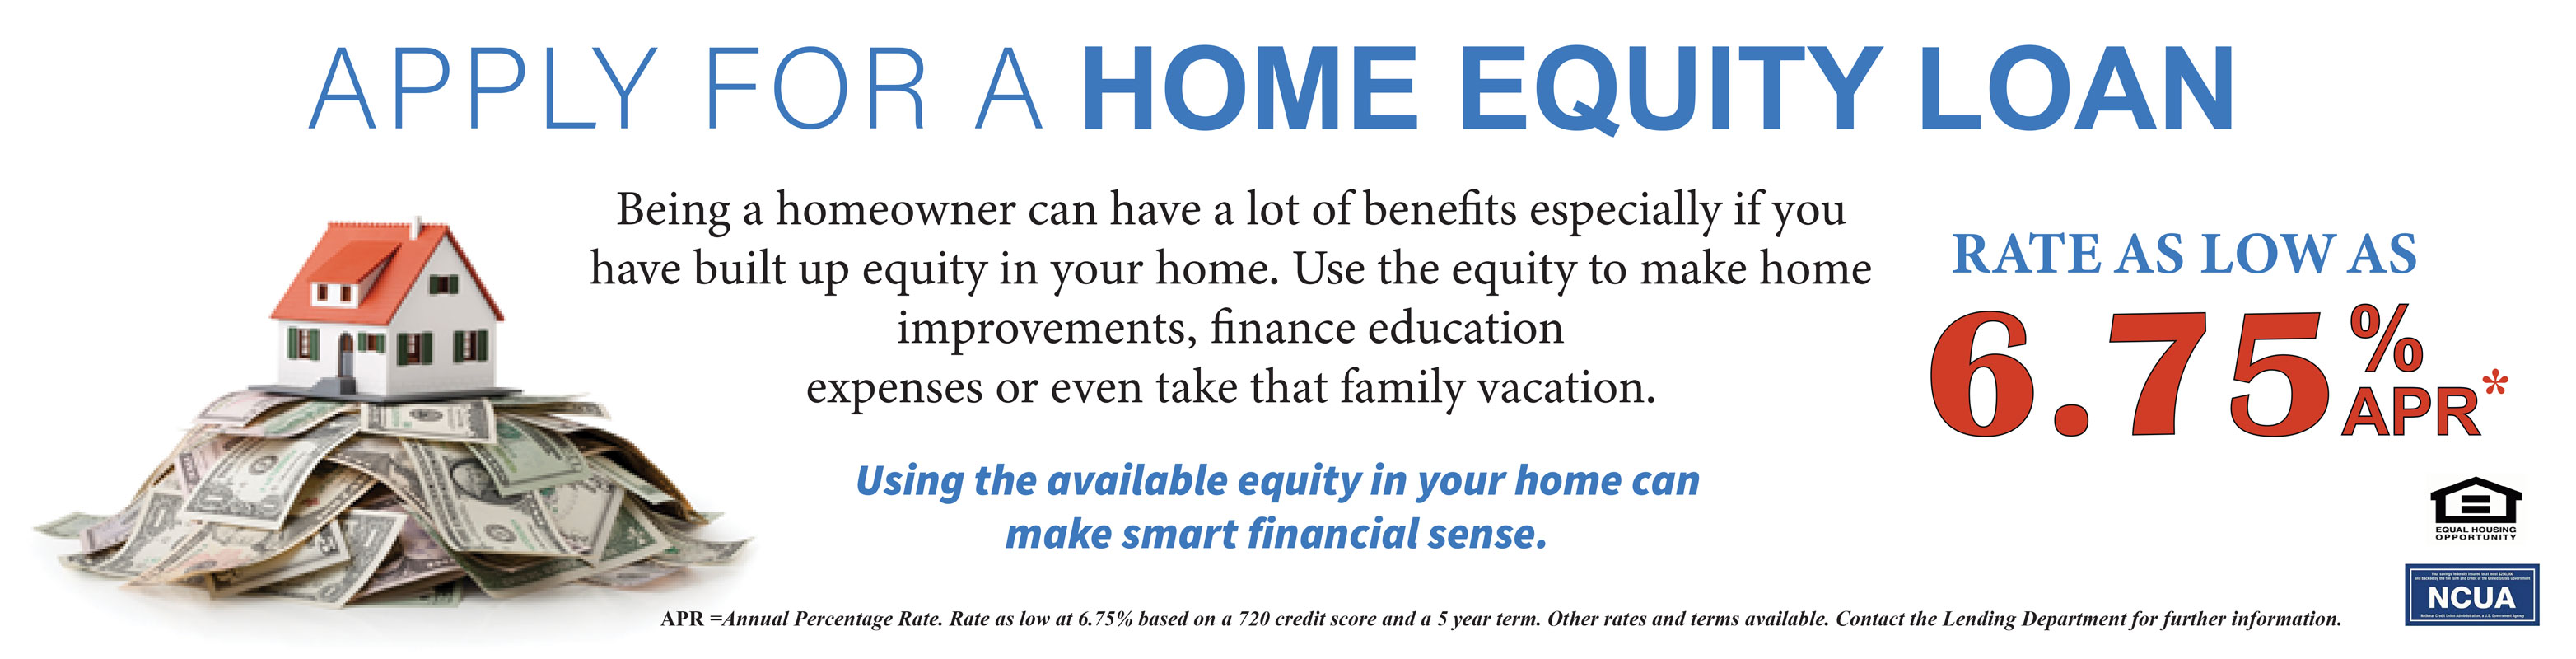 Apply for a home equity loan. Rates as low as 7% APR